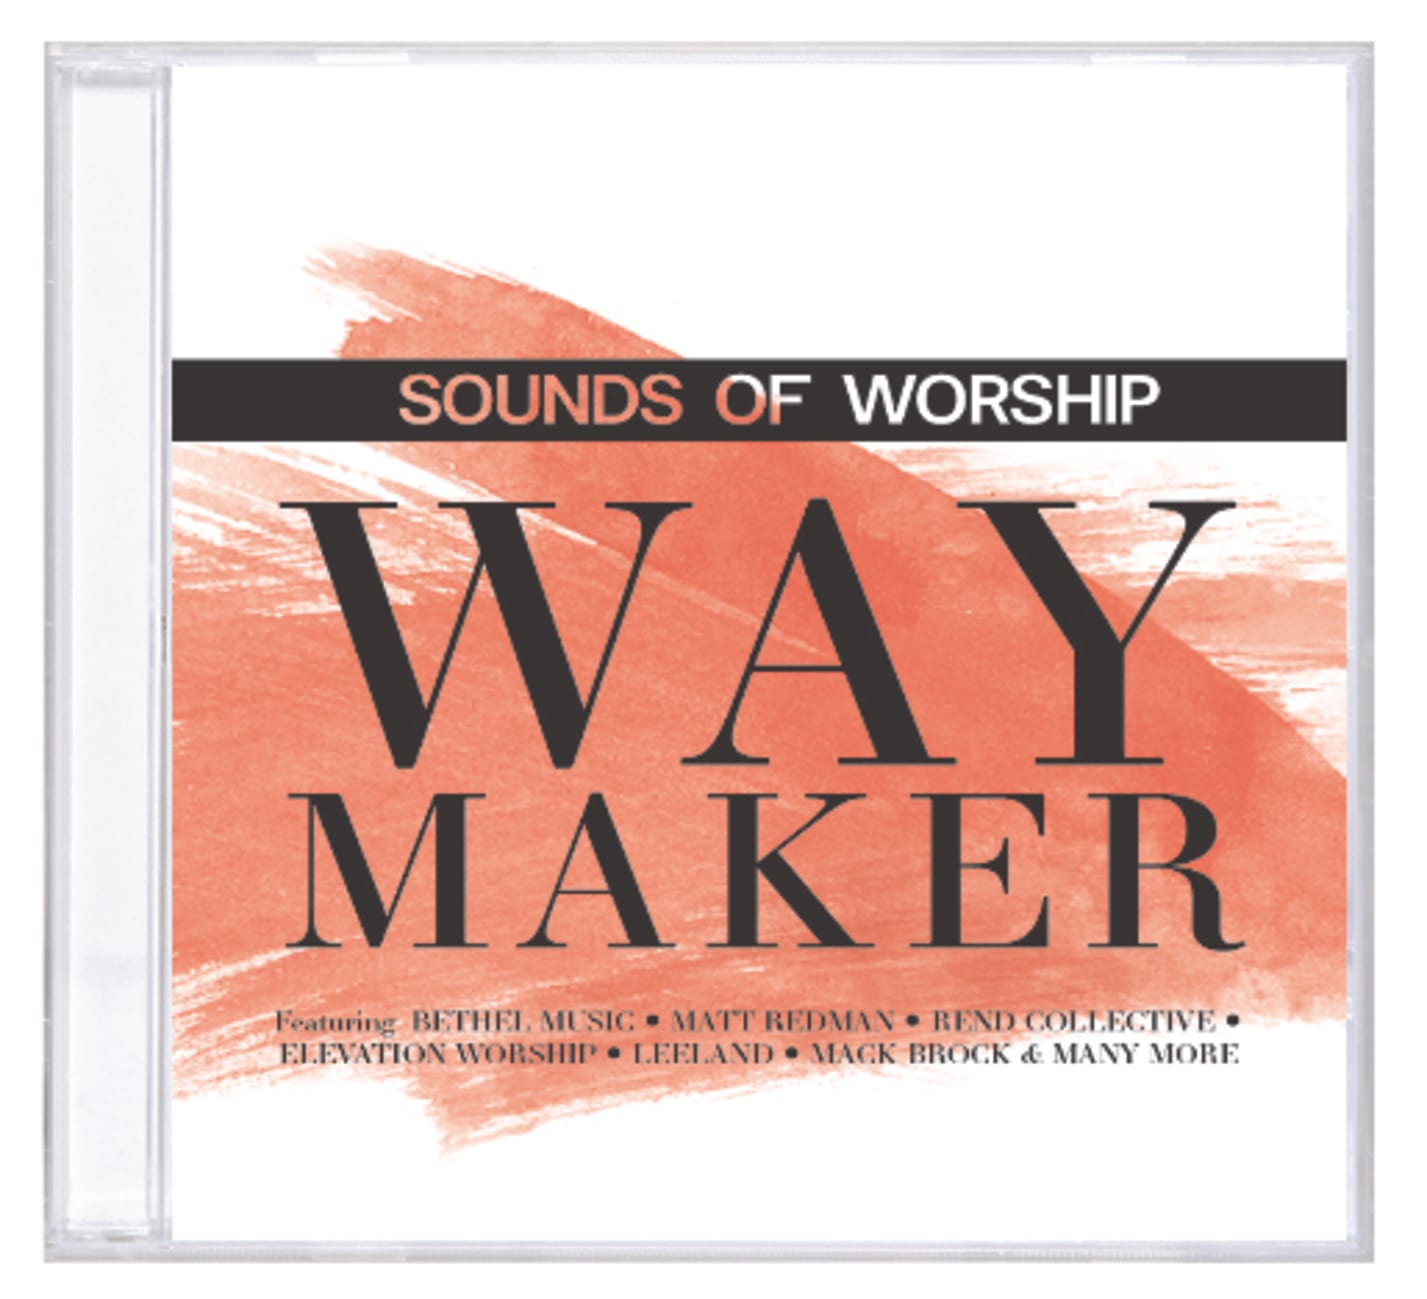 Sounds of Worship: Way Maker Double CD CD